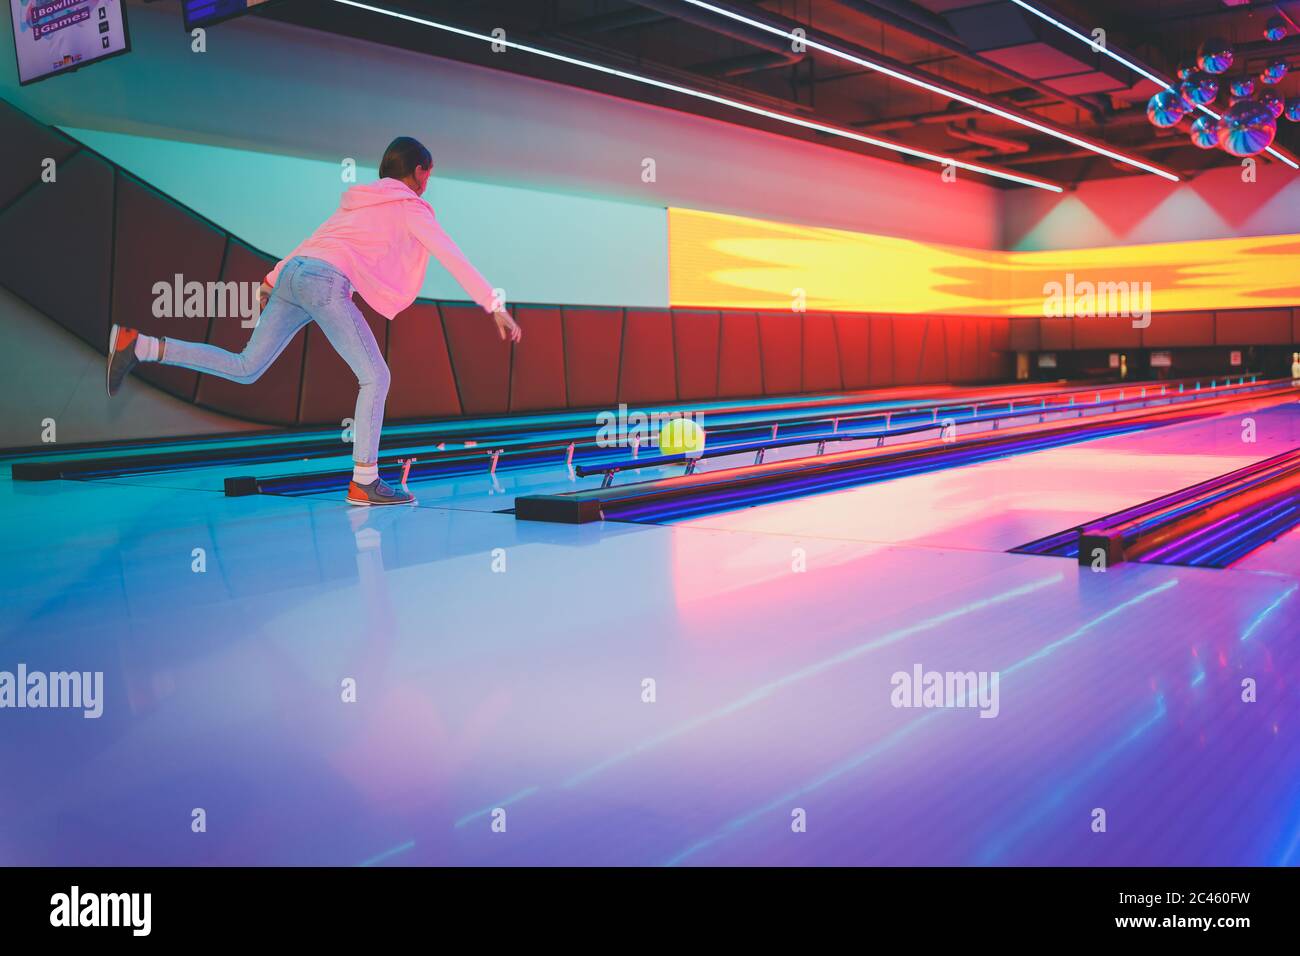 Young girl, tween age, bowling on indoor bowling lane Stock Photo